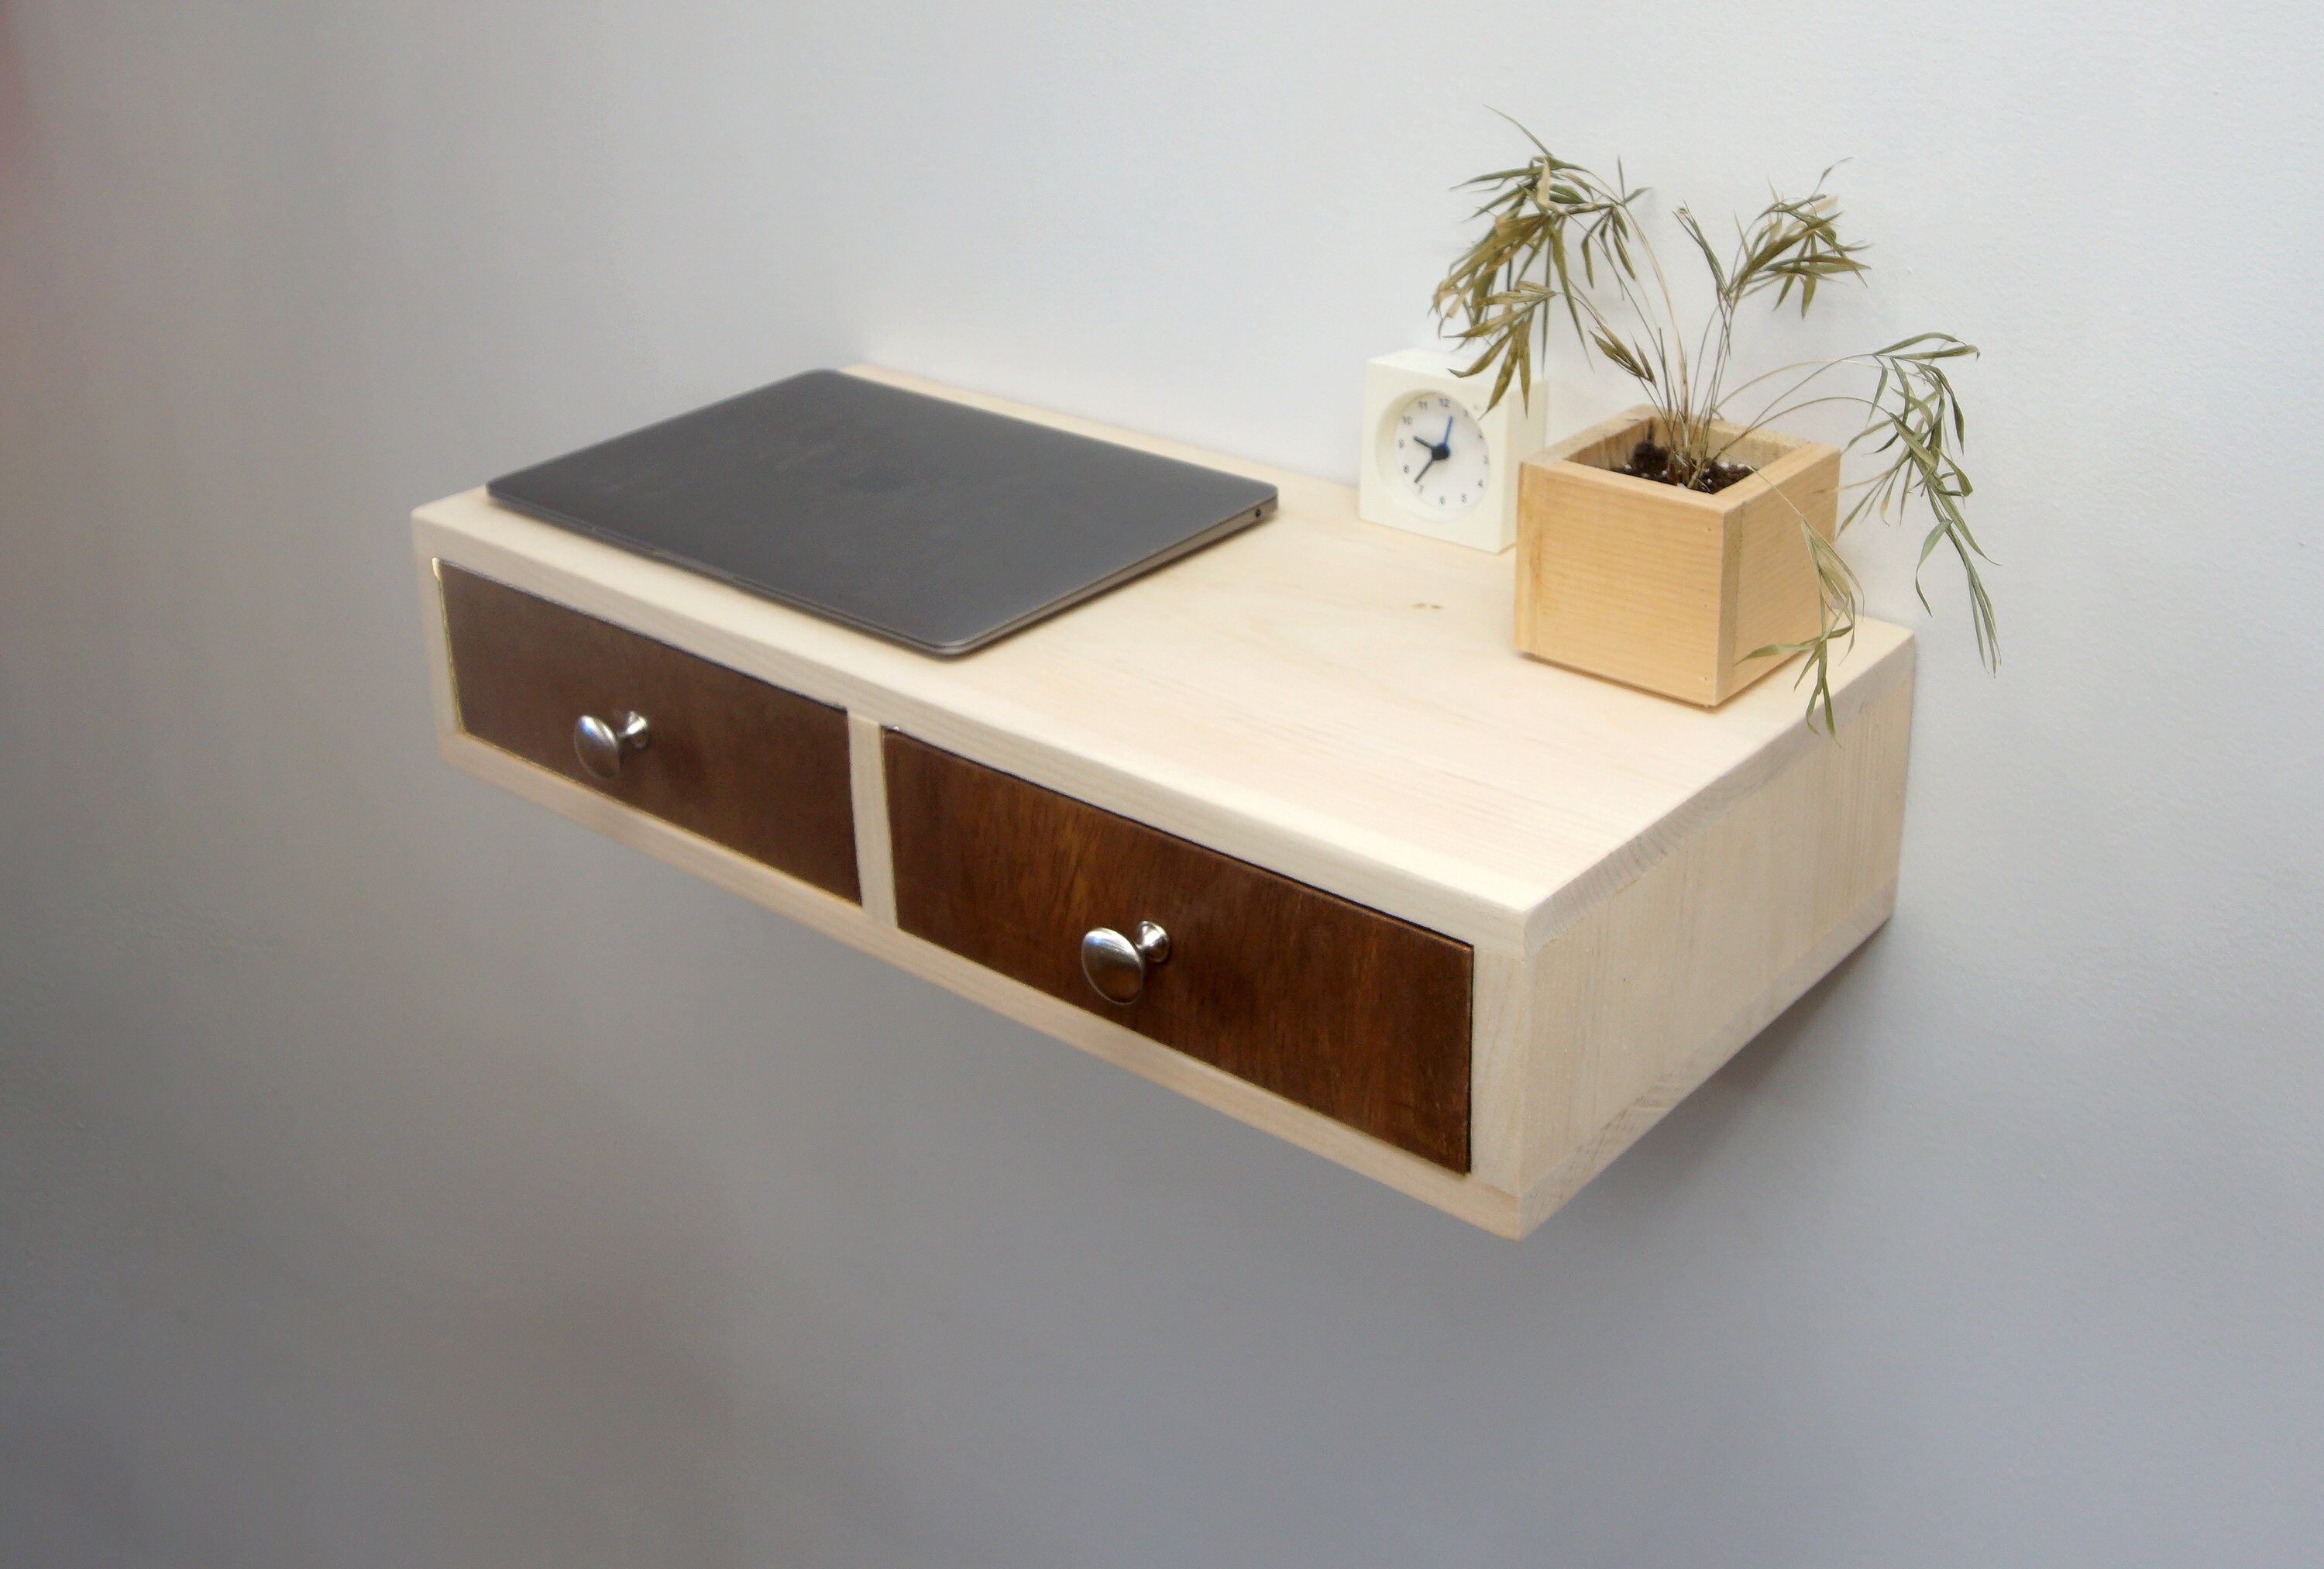 Floating Wall Mounted Desk With 2 Drawers, Hanging Shelf With Storage 